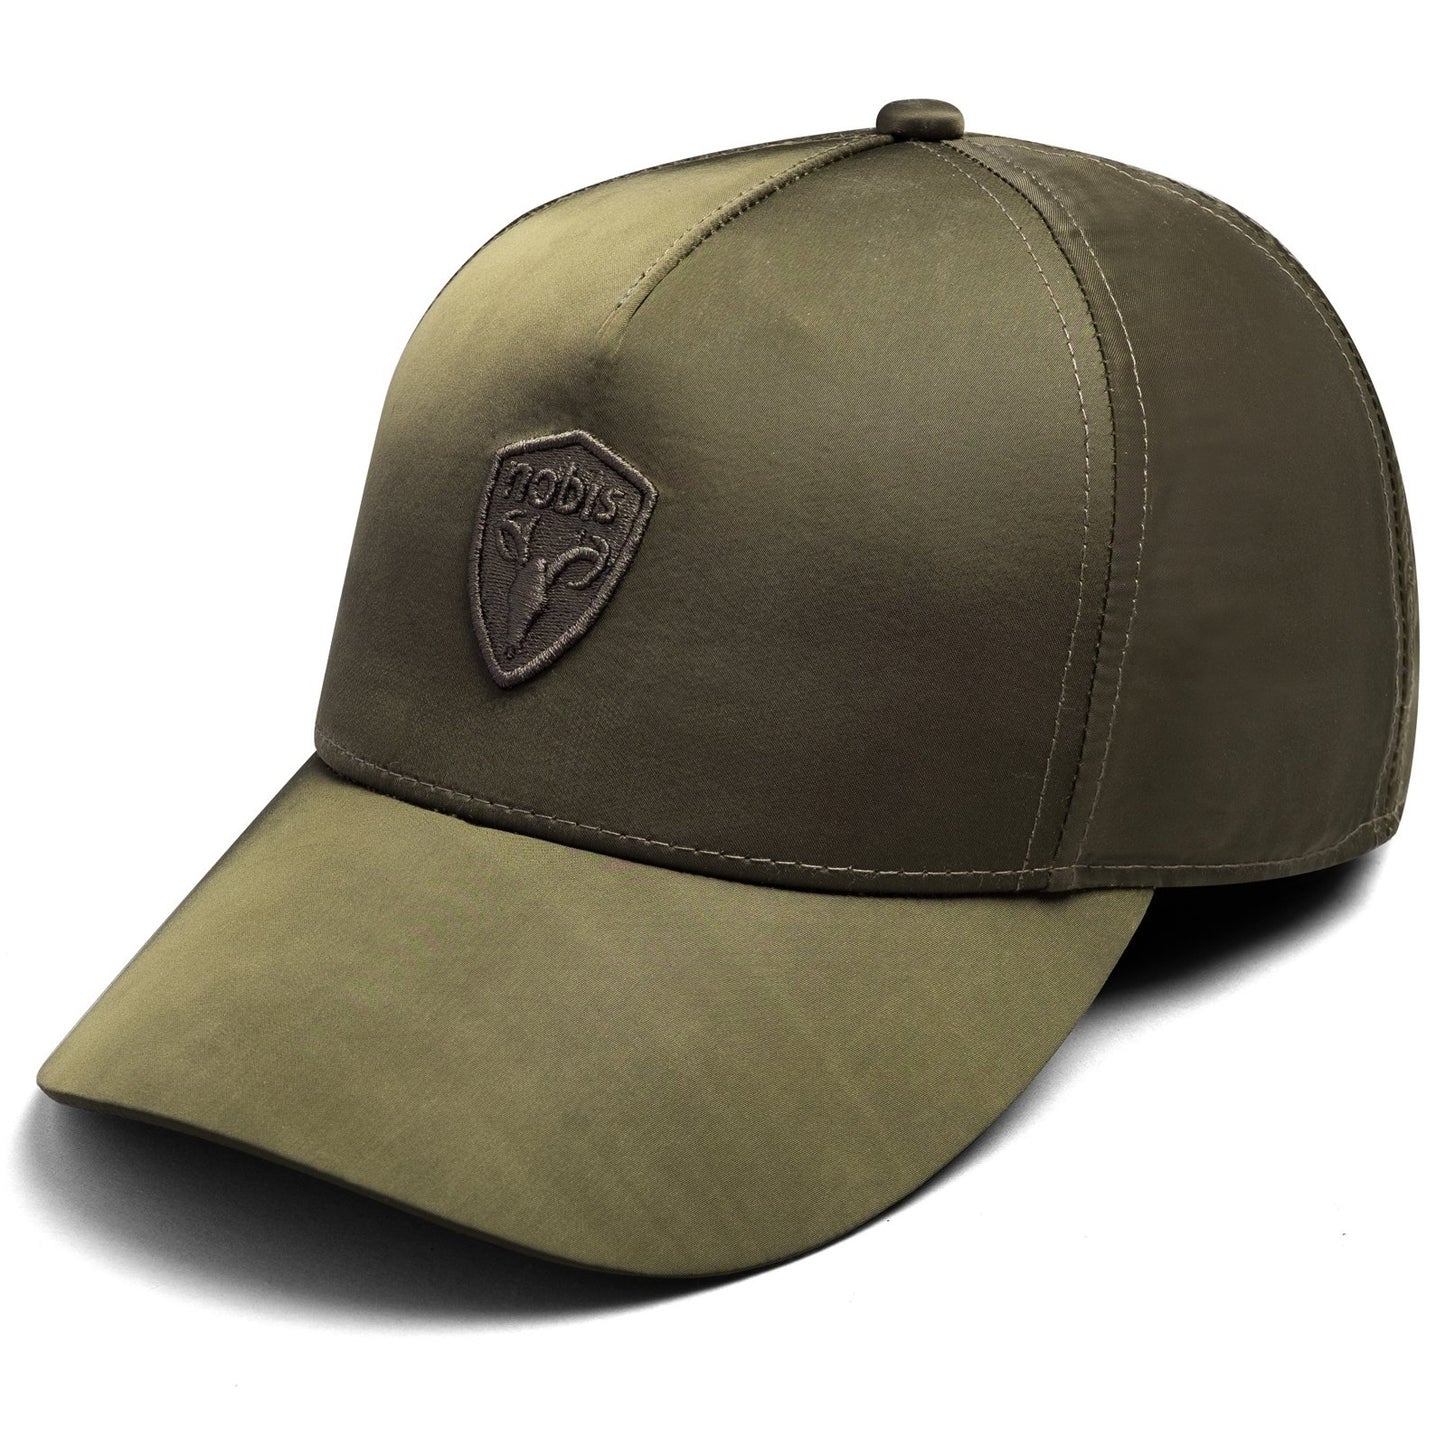 Satine Adjustable Cap in 5-panel construction, mid height crown, curved peak brim, and adjustable strap closure, in Fatigue